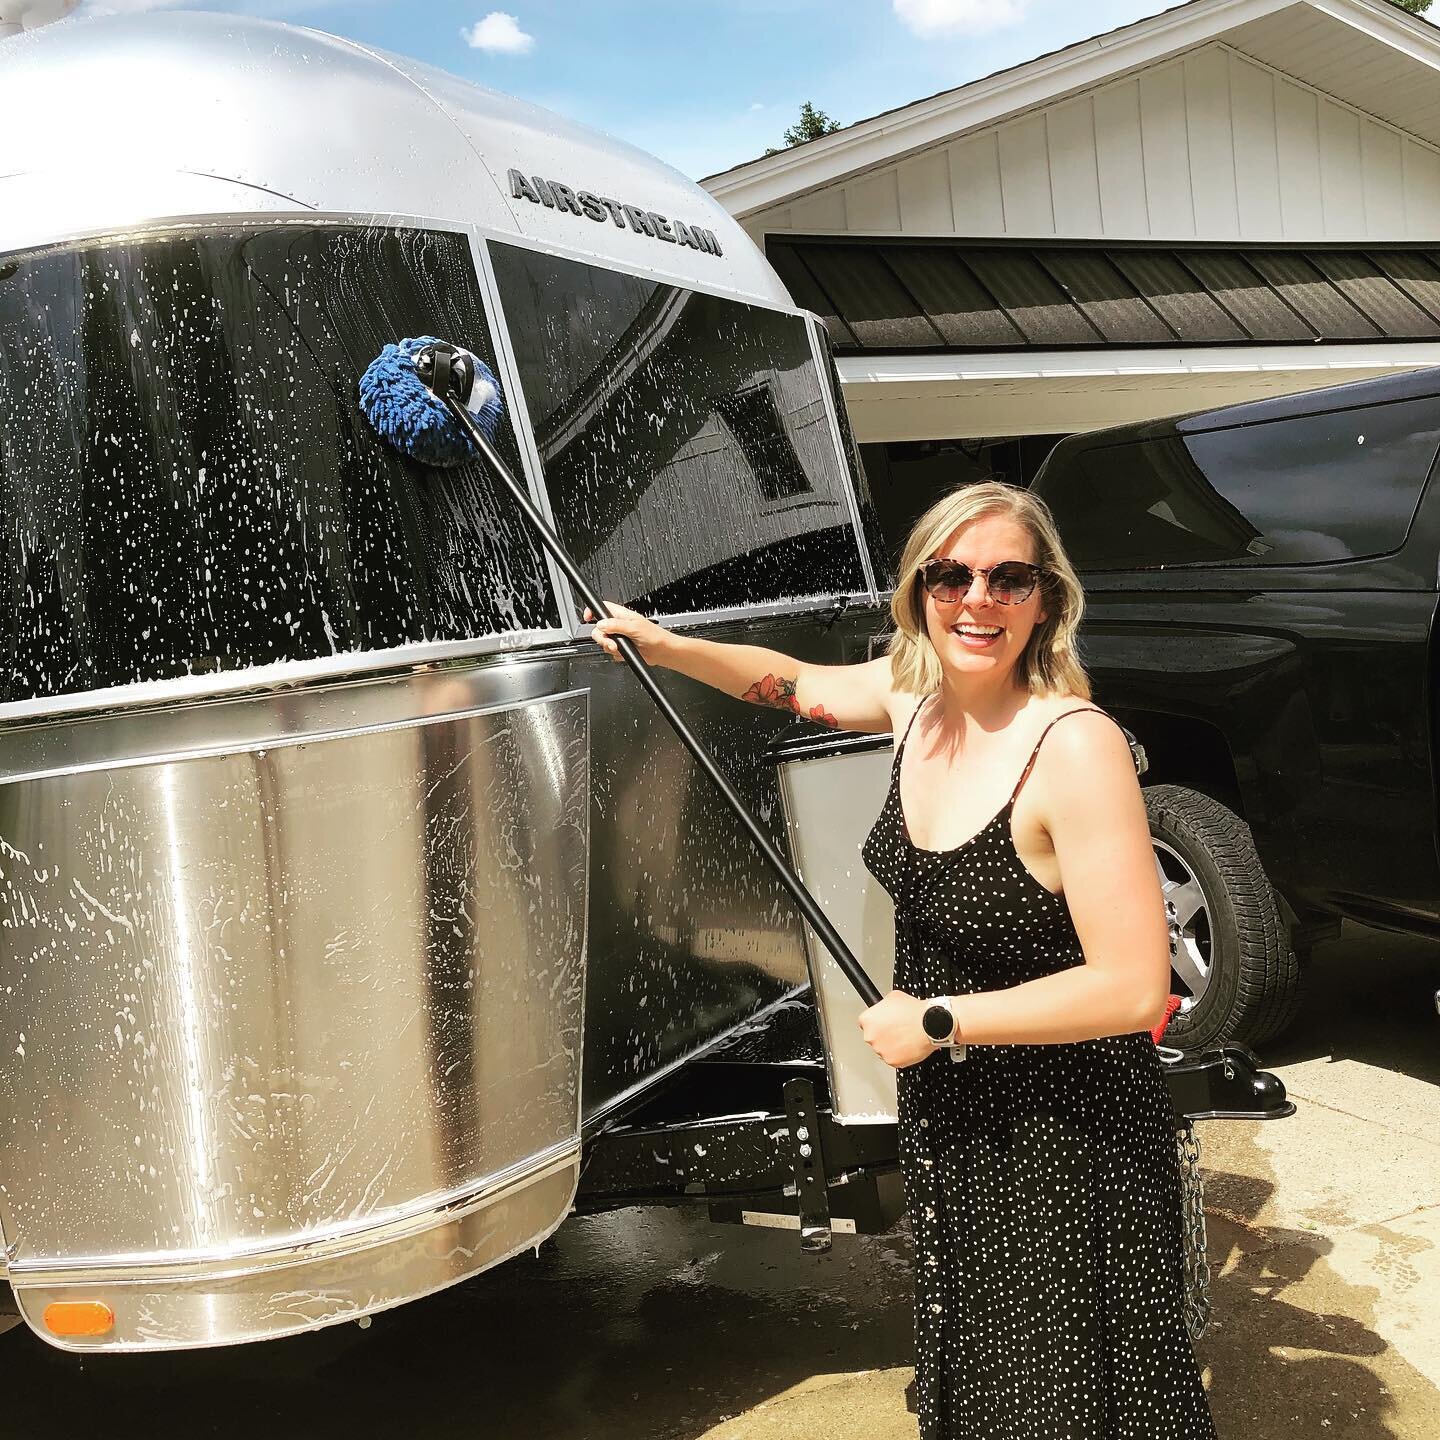 Helllooo everybody! 👋🏼 We&rsquo;re back! 😁😁😁 We picked Jolly Jr. up from storage today and gave her a nice wash. It feels so good to have her back and we can&rsquo;t wait for a summer full of camping with Loren.

Before we take our first trip, t